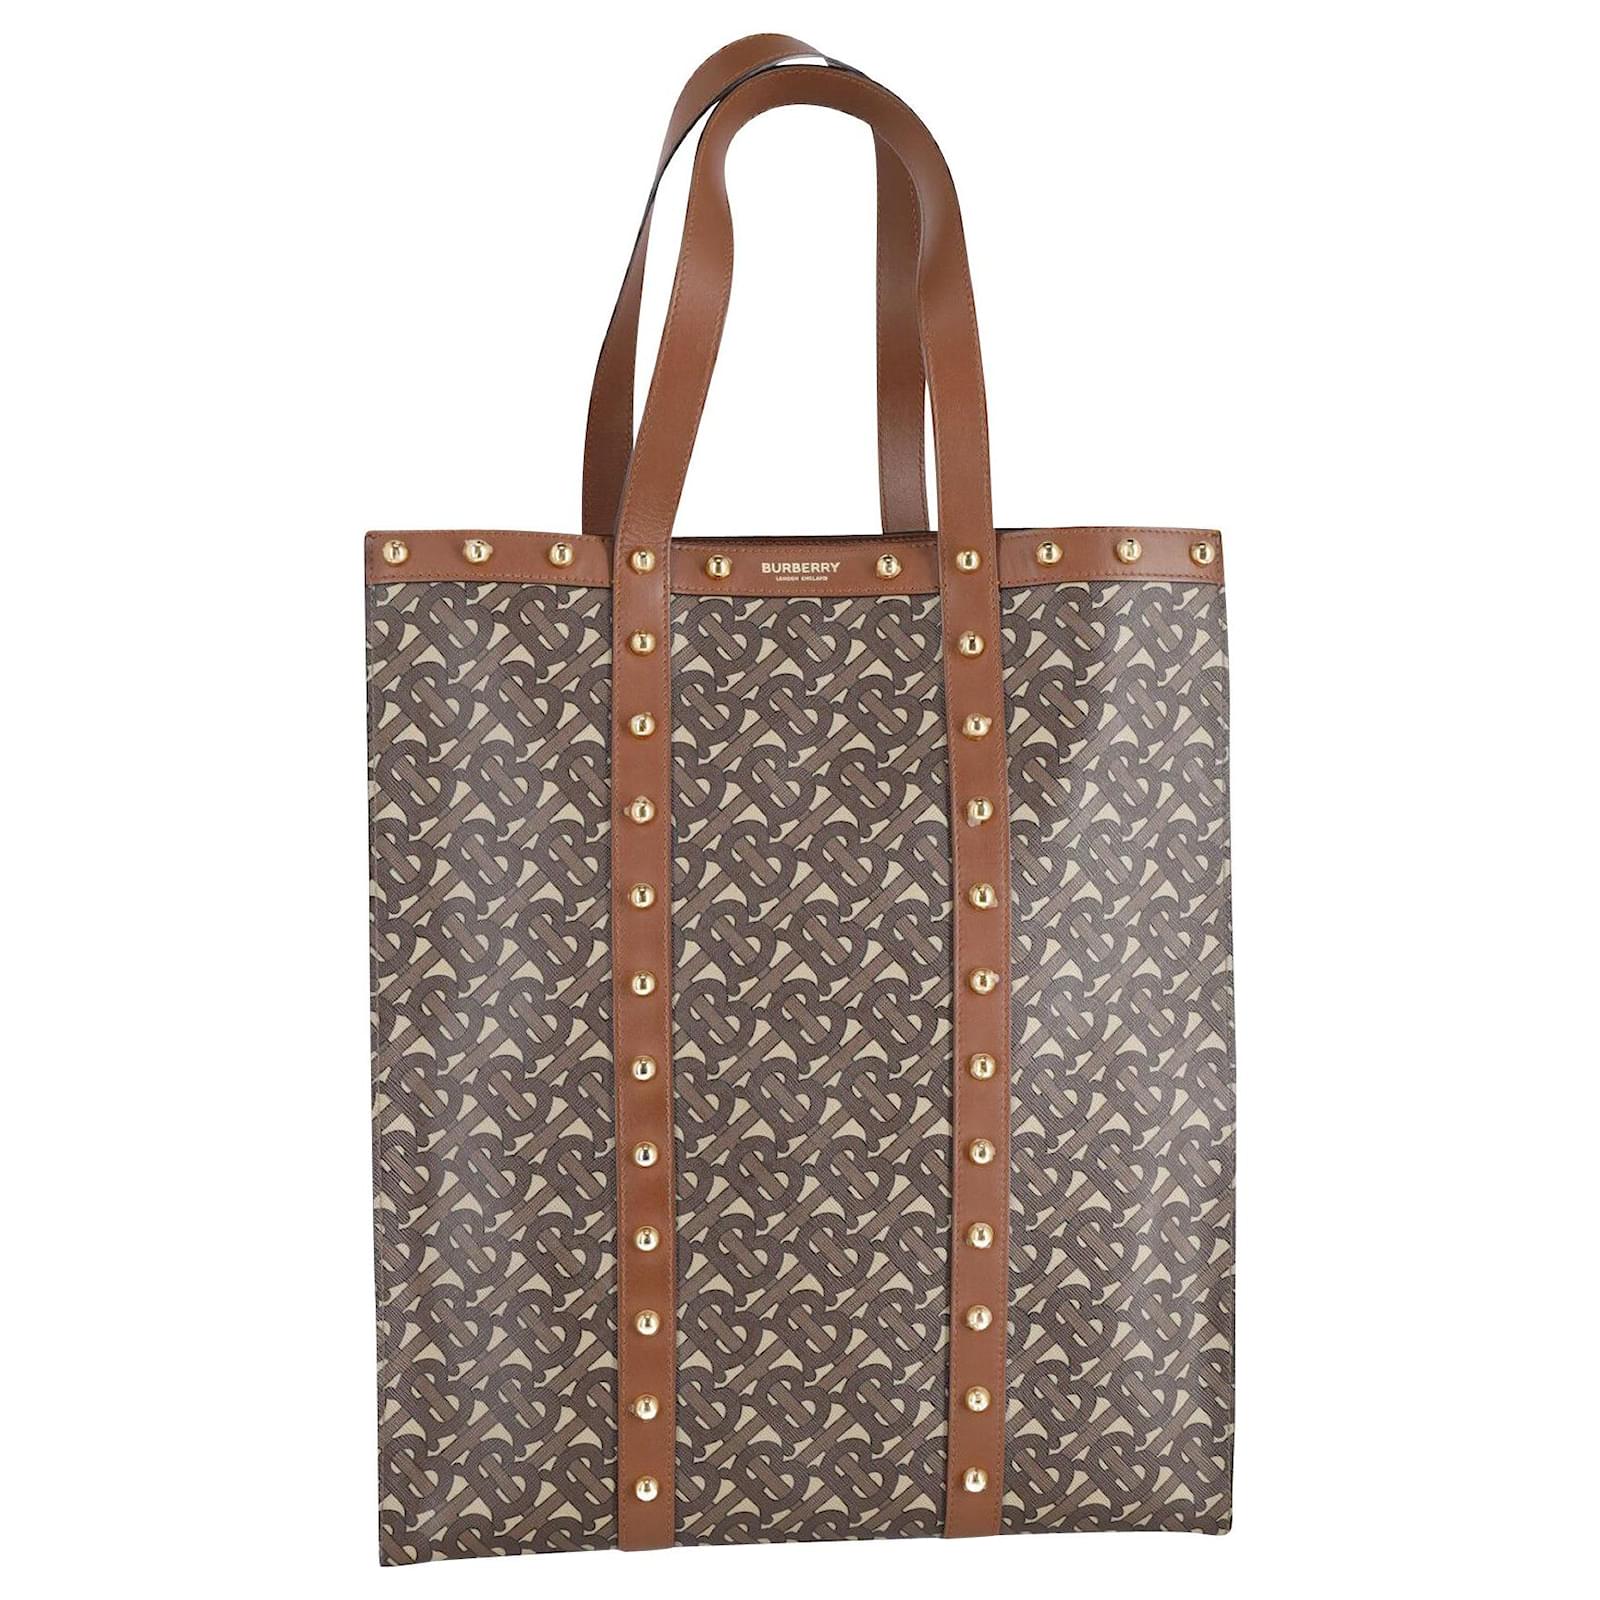 Burberry Monogram Portrait Tote in Brown Calfskin Leather Pony